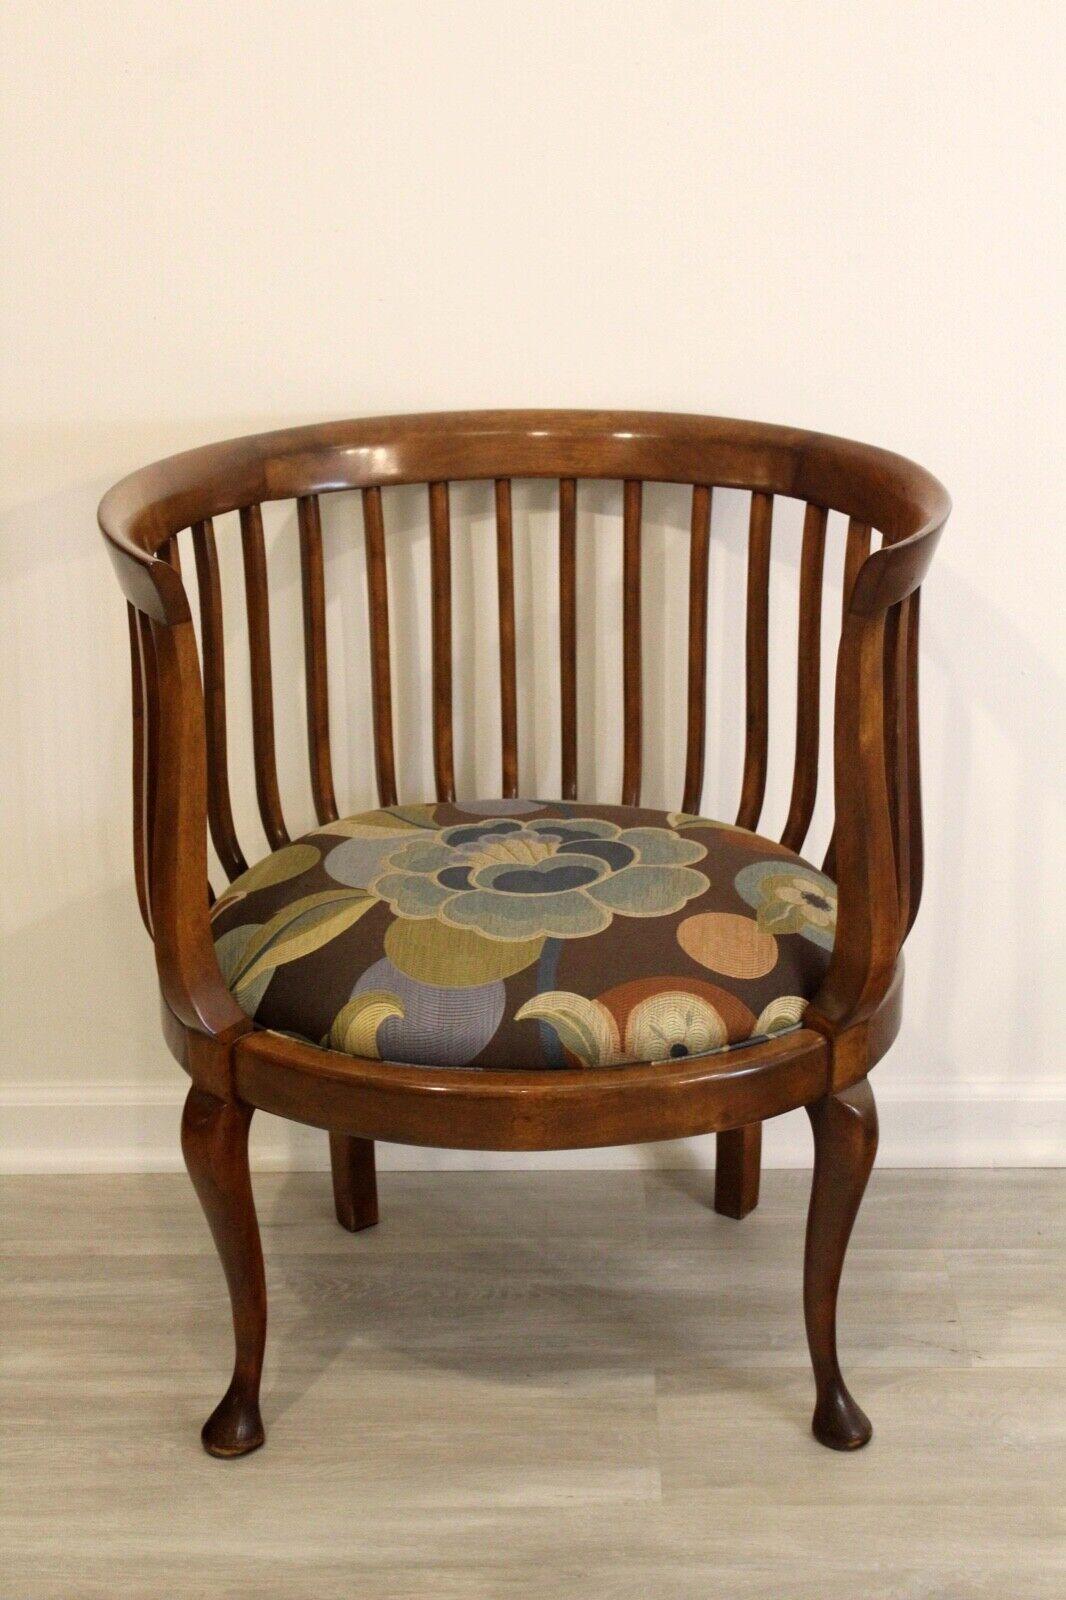 For your consideration is this cute and cozy Mission style tiger oak round back barrel chair.

Dimensions: 26.5w x 22d x 30.25h Arm Height: 30.25